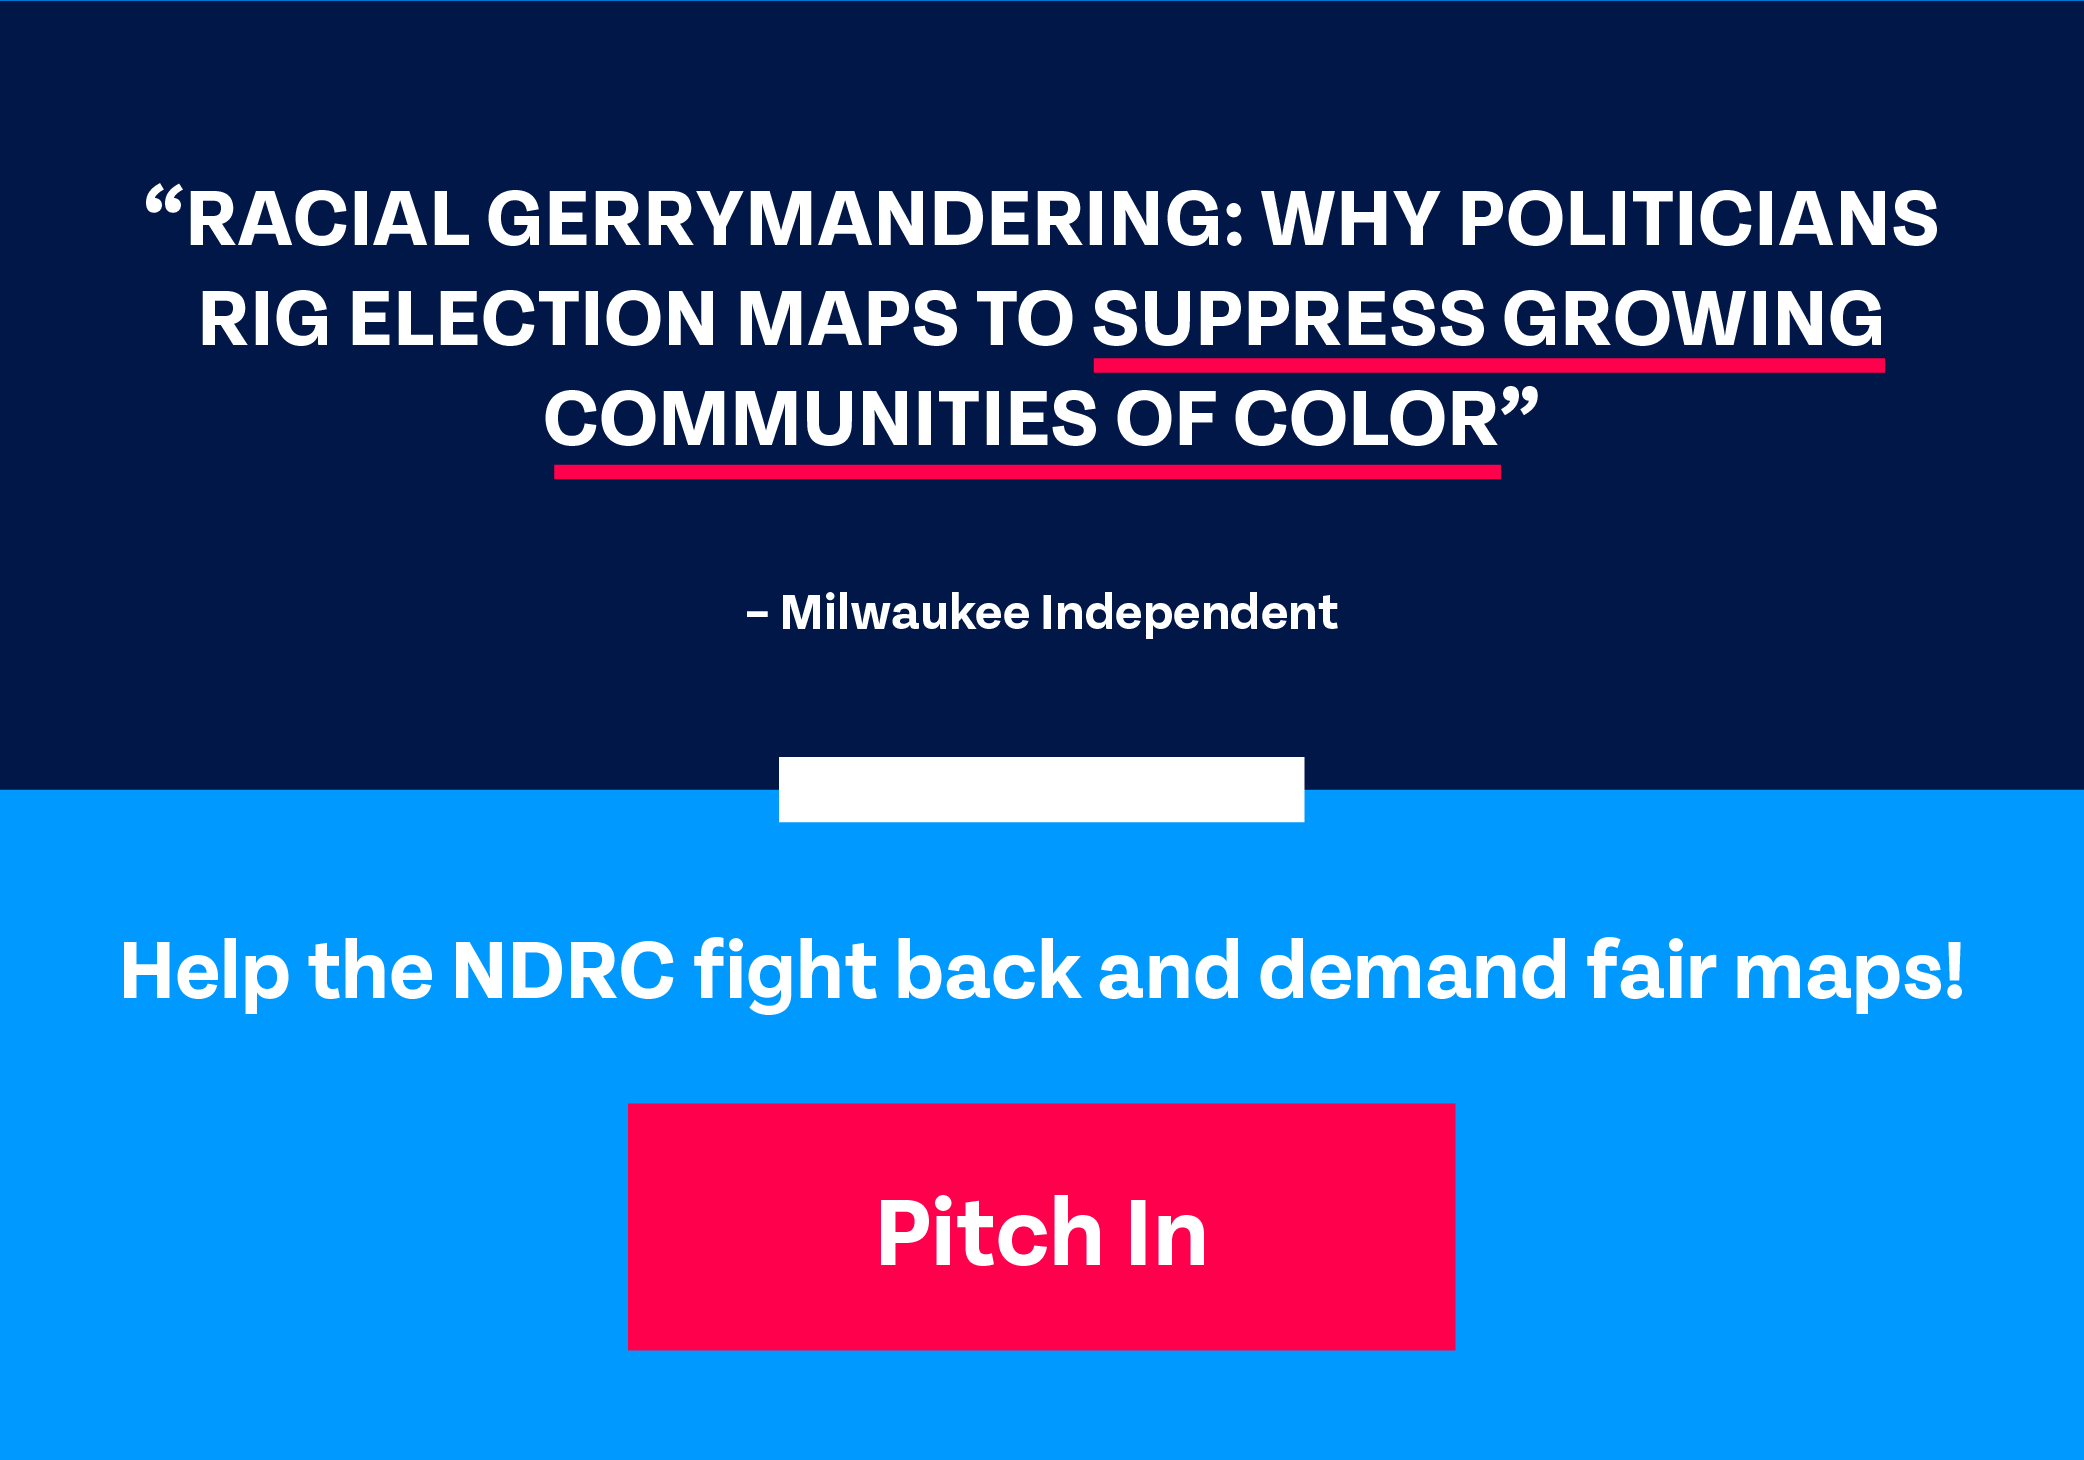 Milwaukee Independent headline: RACIAL GERRYMANDERING: WHY POLITICIANS RIG ELECTION MAPS TO SUPPRESS GROWING COMMUNITIES OF COLOR